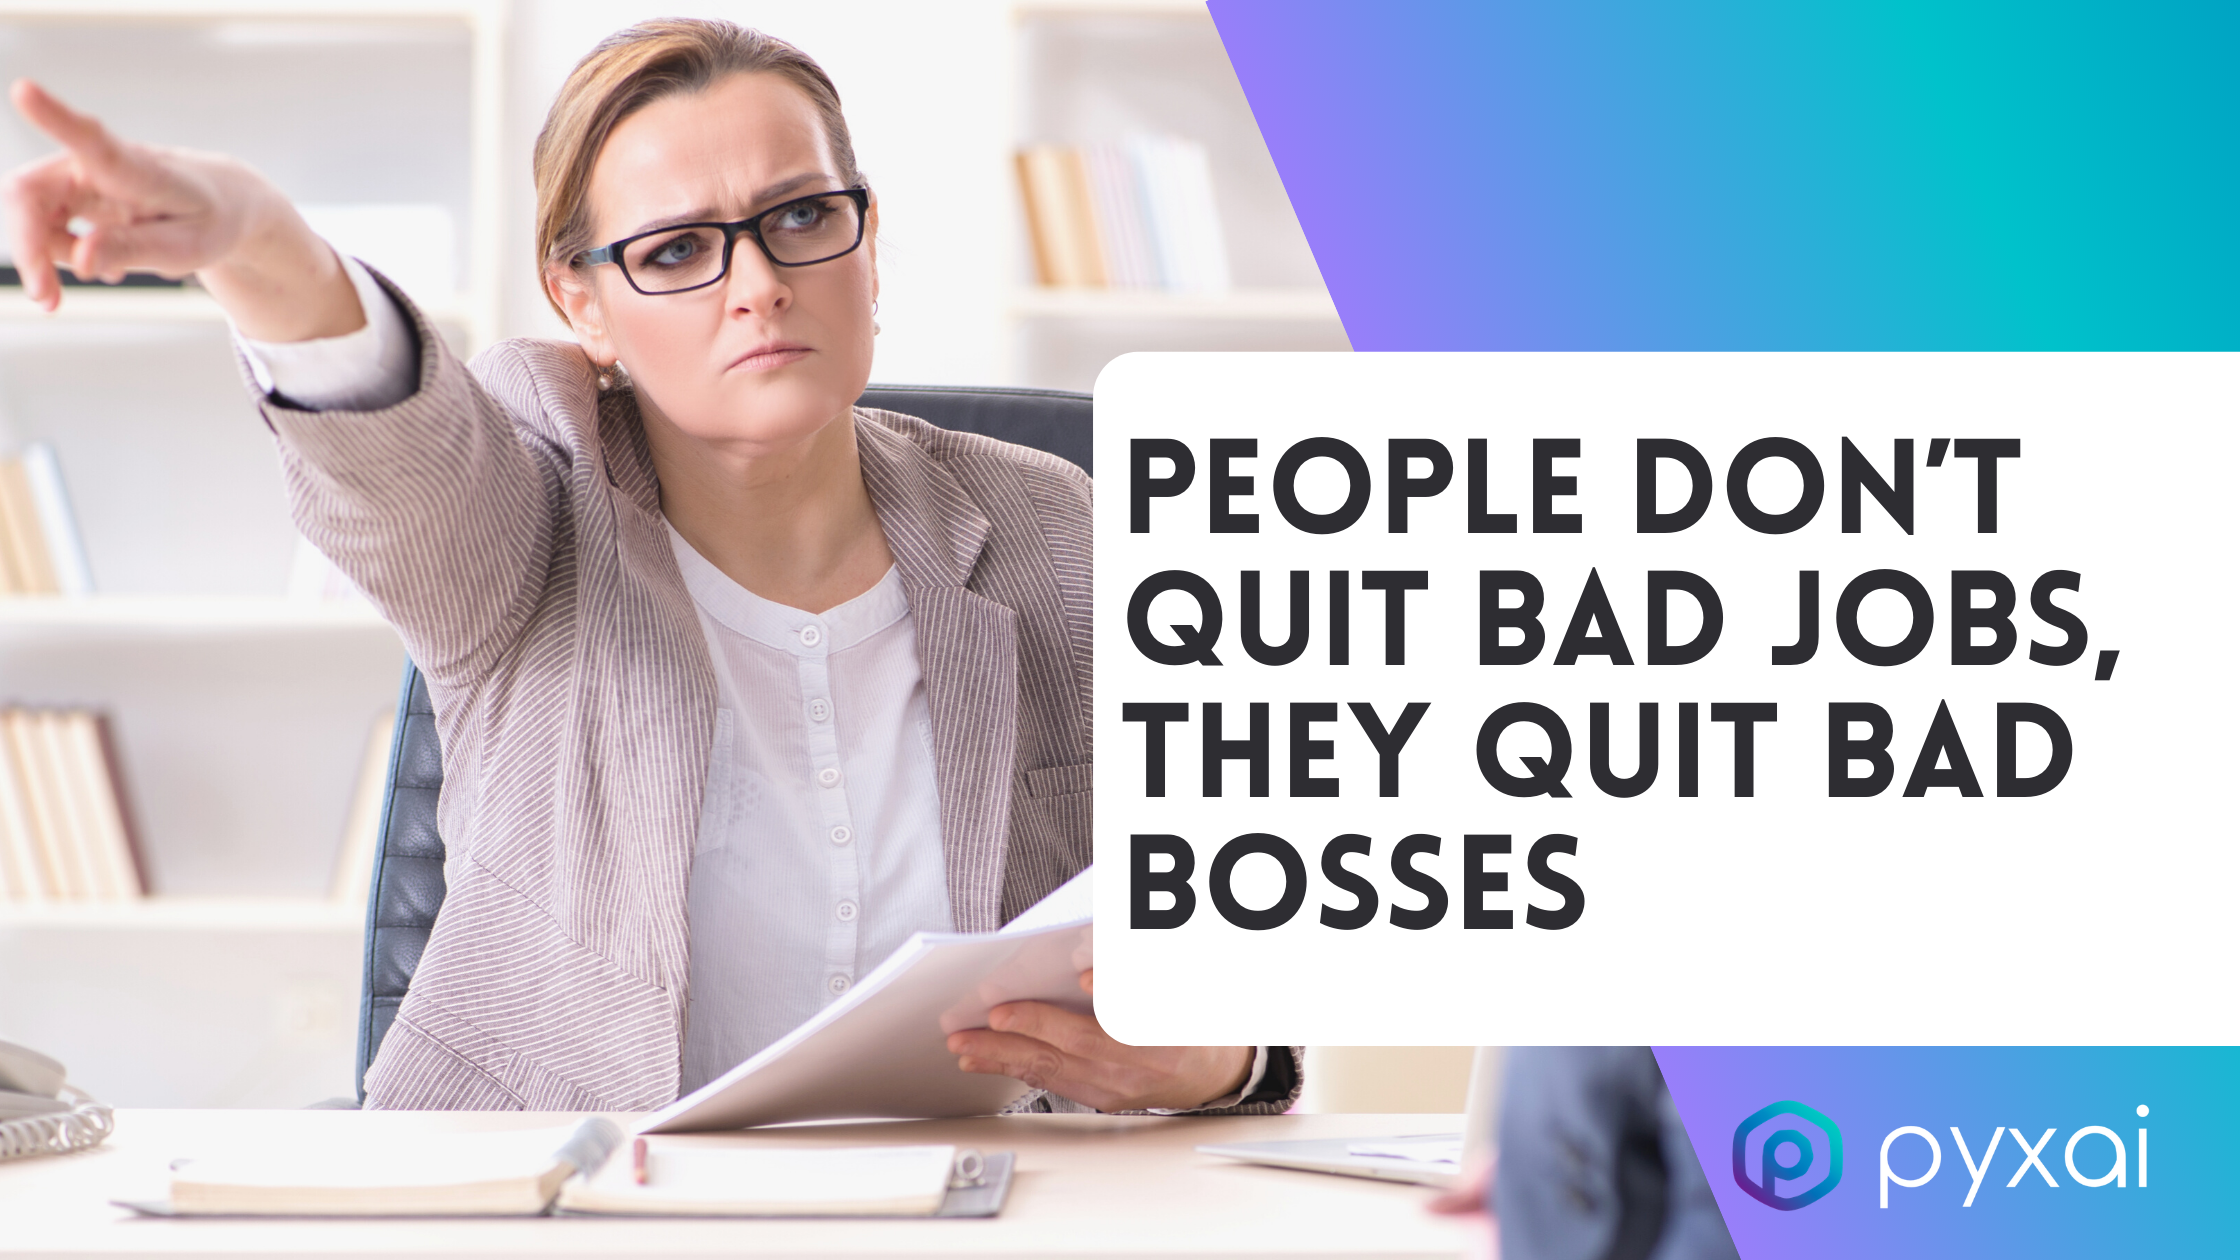 People don’t quit bad jobs, they quit bad bosses